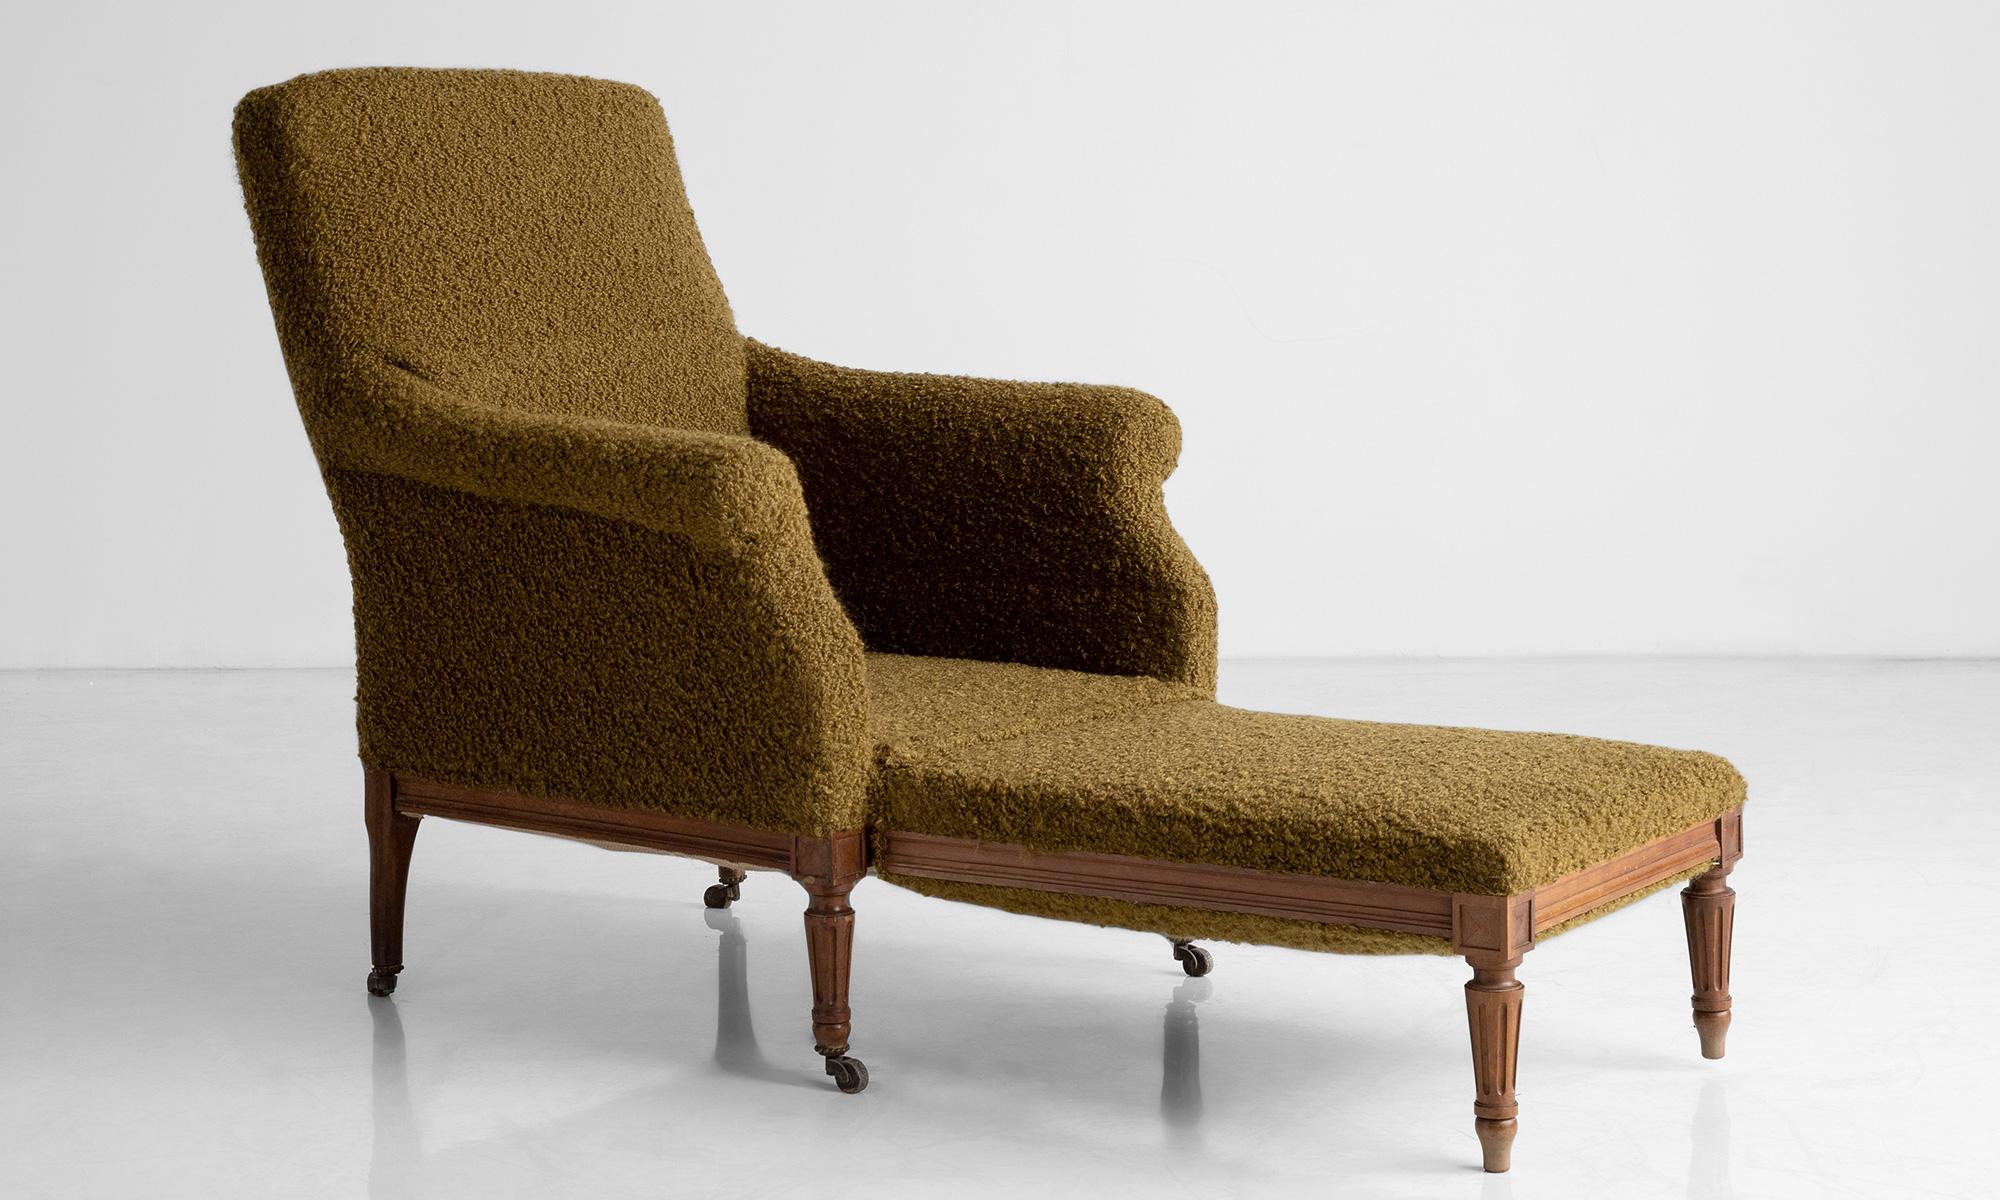 French Convertible Chair-Lounge in Boucle by Pierre Frey, France Circa 1880